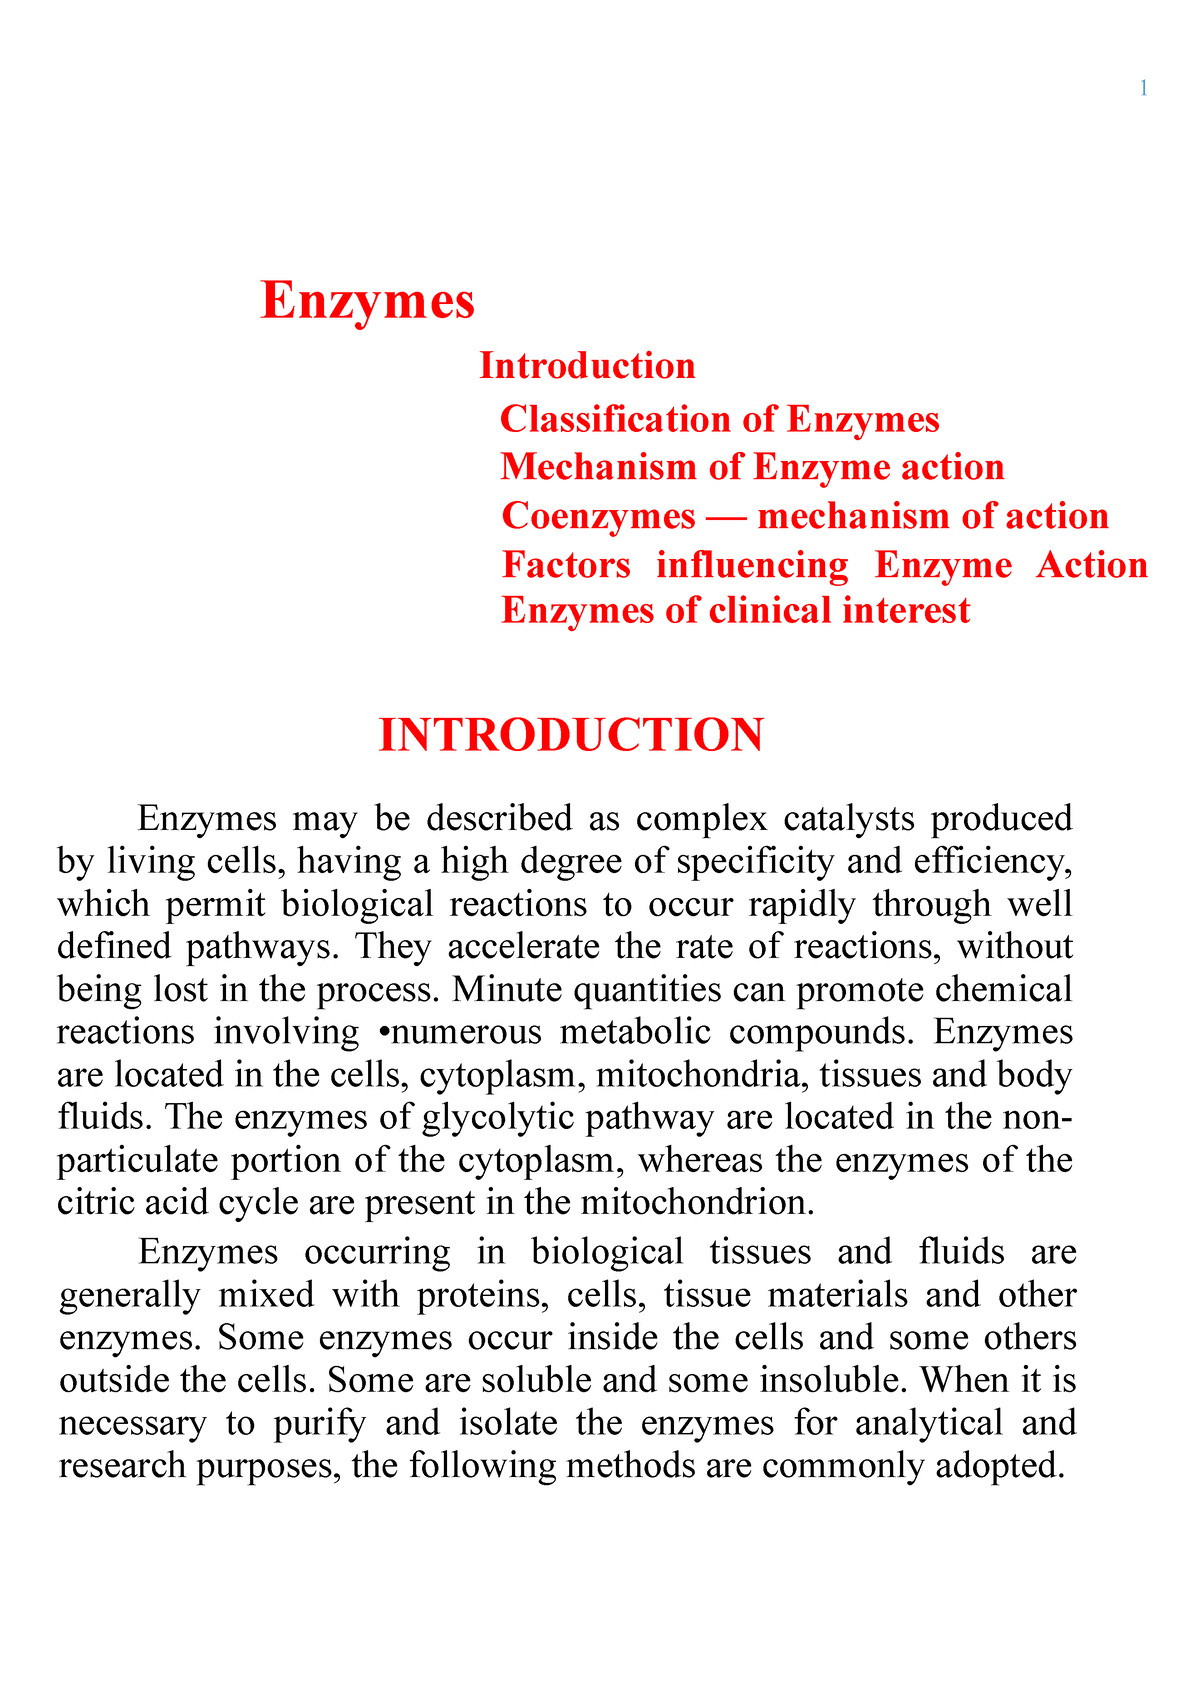 dissertation thesis on enzyme